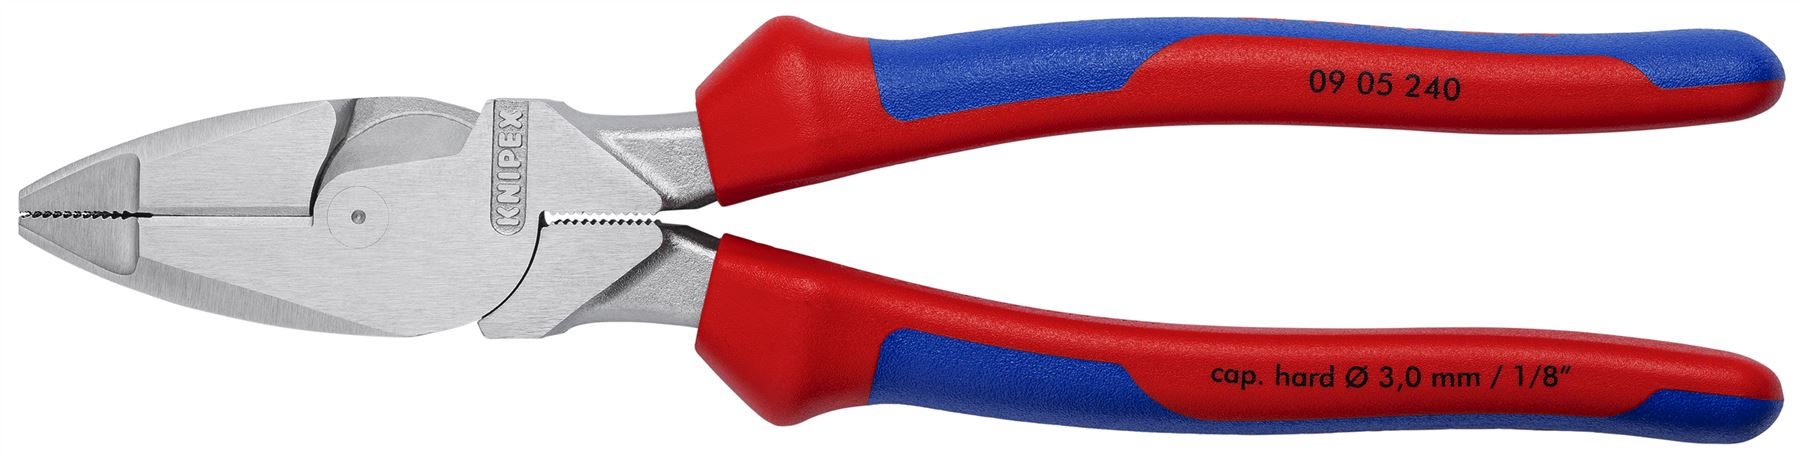 Knipex Linemans Pliers American Style 240mm Multi Component Grips Chrome Plated 09 05 240